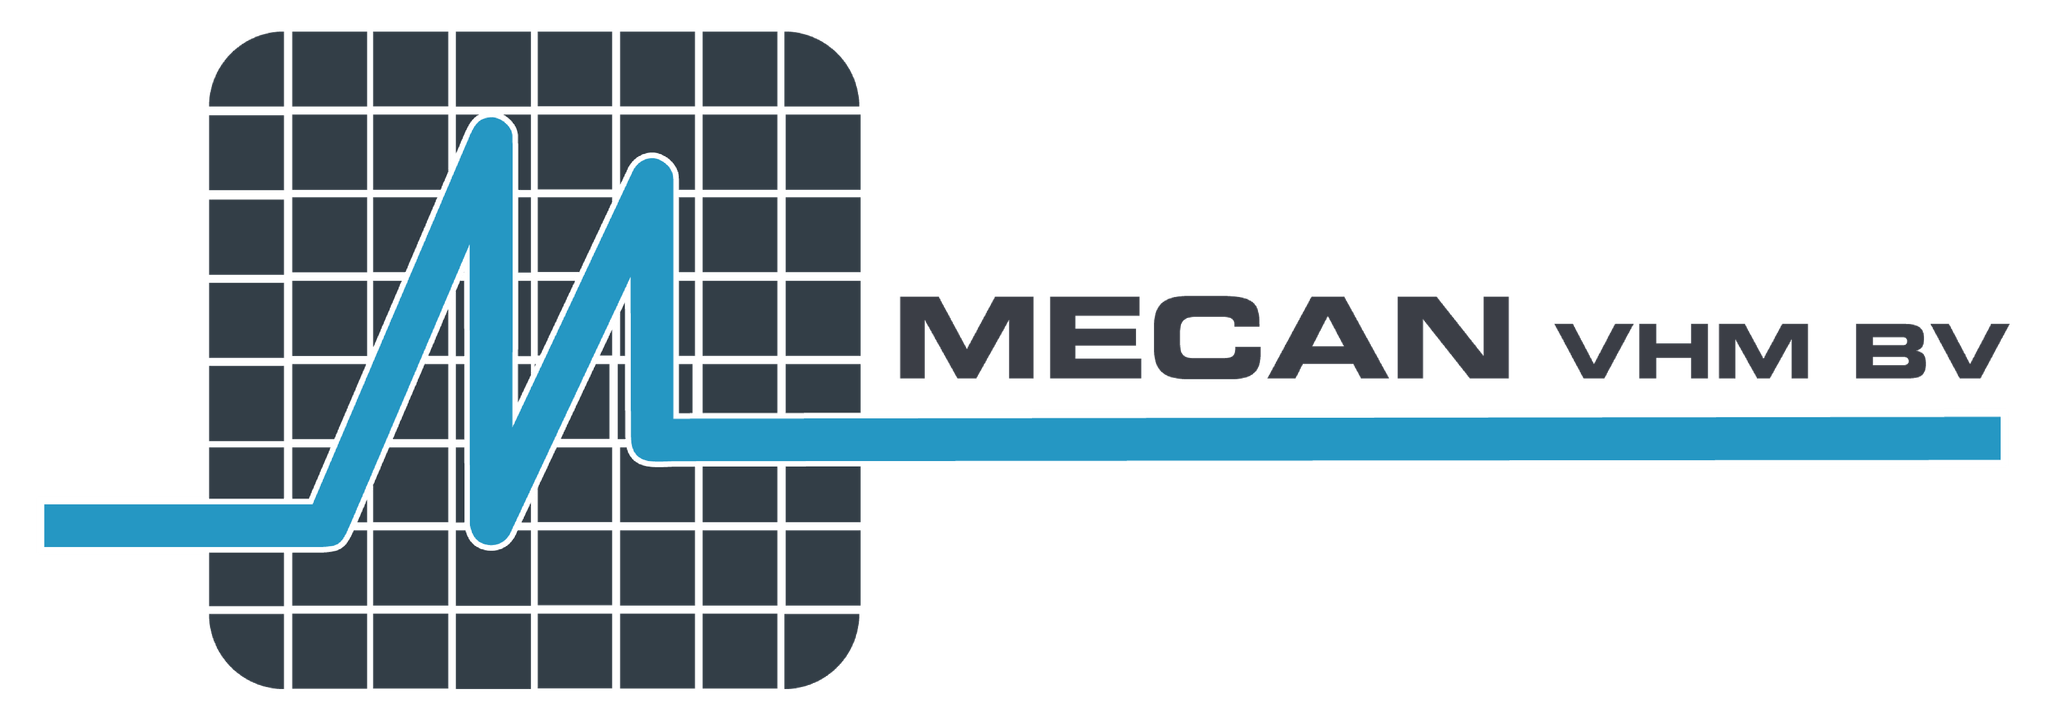 Mecan Announces Their Attendance To Europe's Premier Two-Day, Conference-Led, Exhibition For Veterinary Professionals